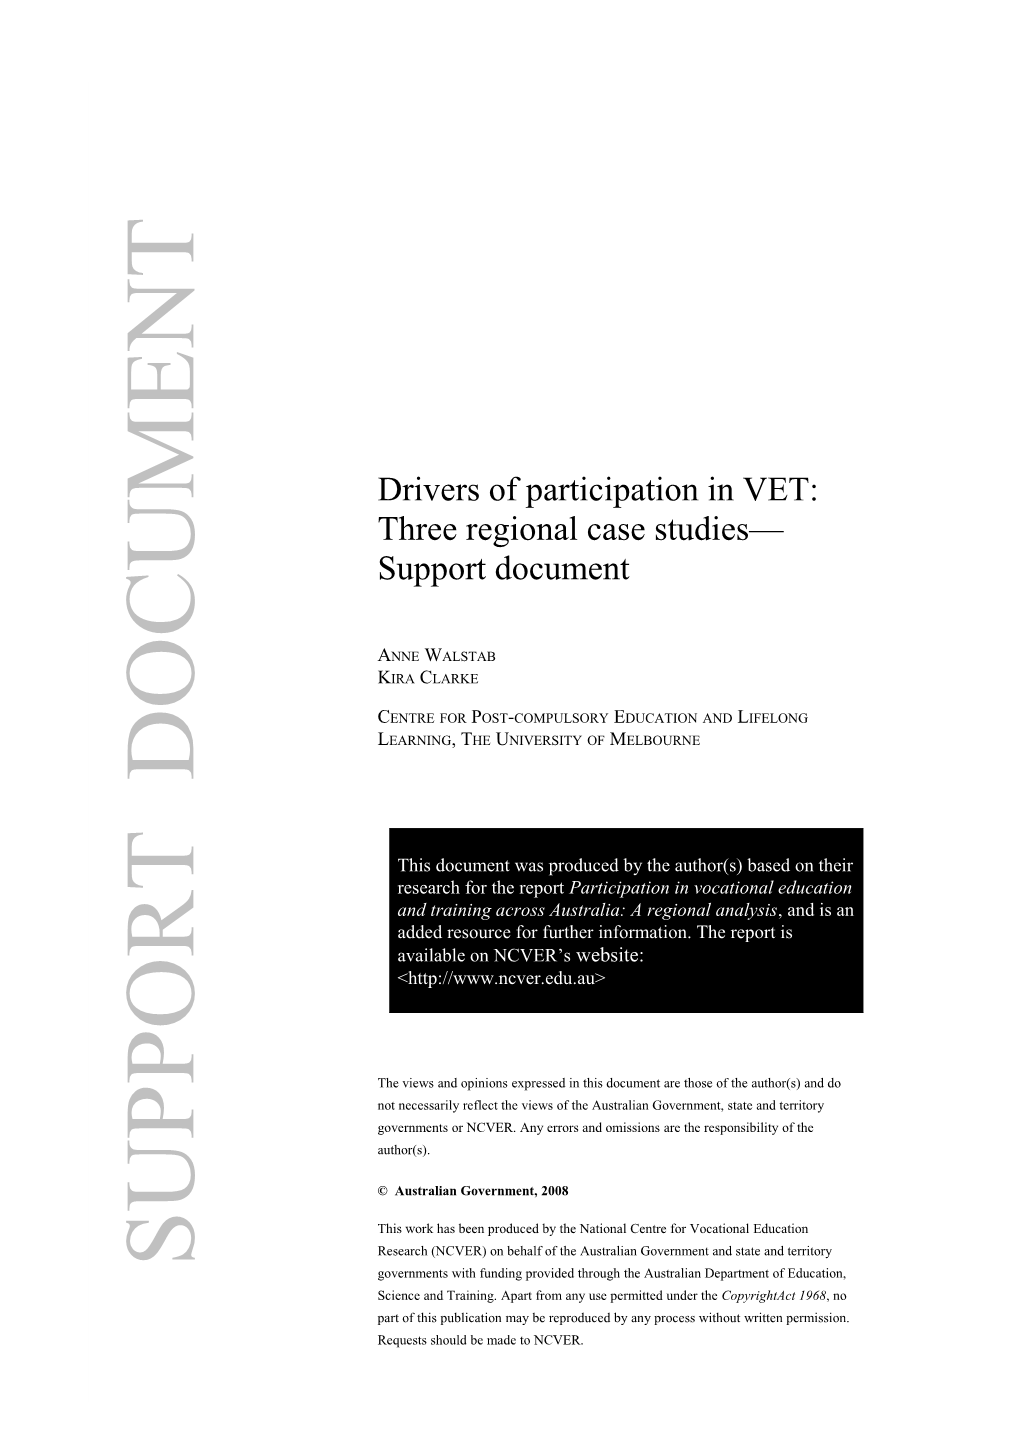 Drivers of Participation in VET: Three Regional Case Studies Support Document